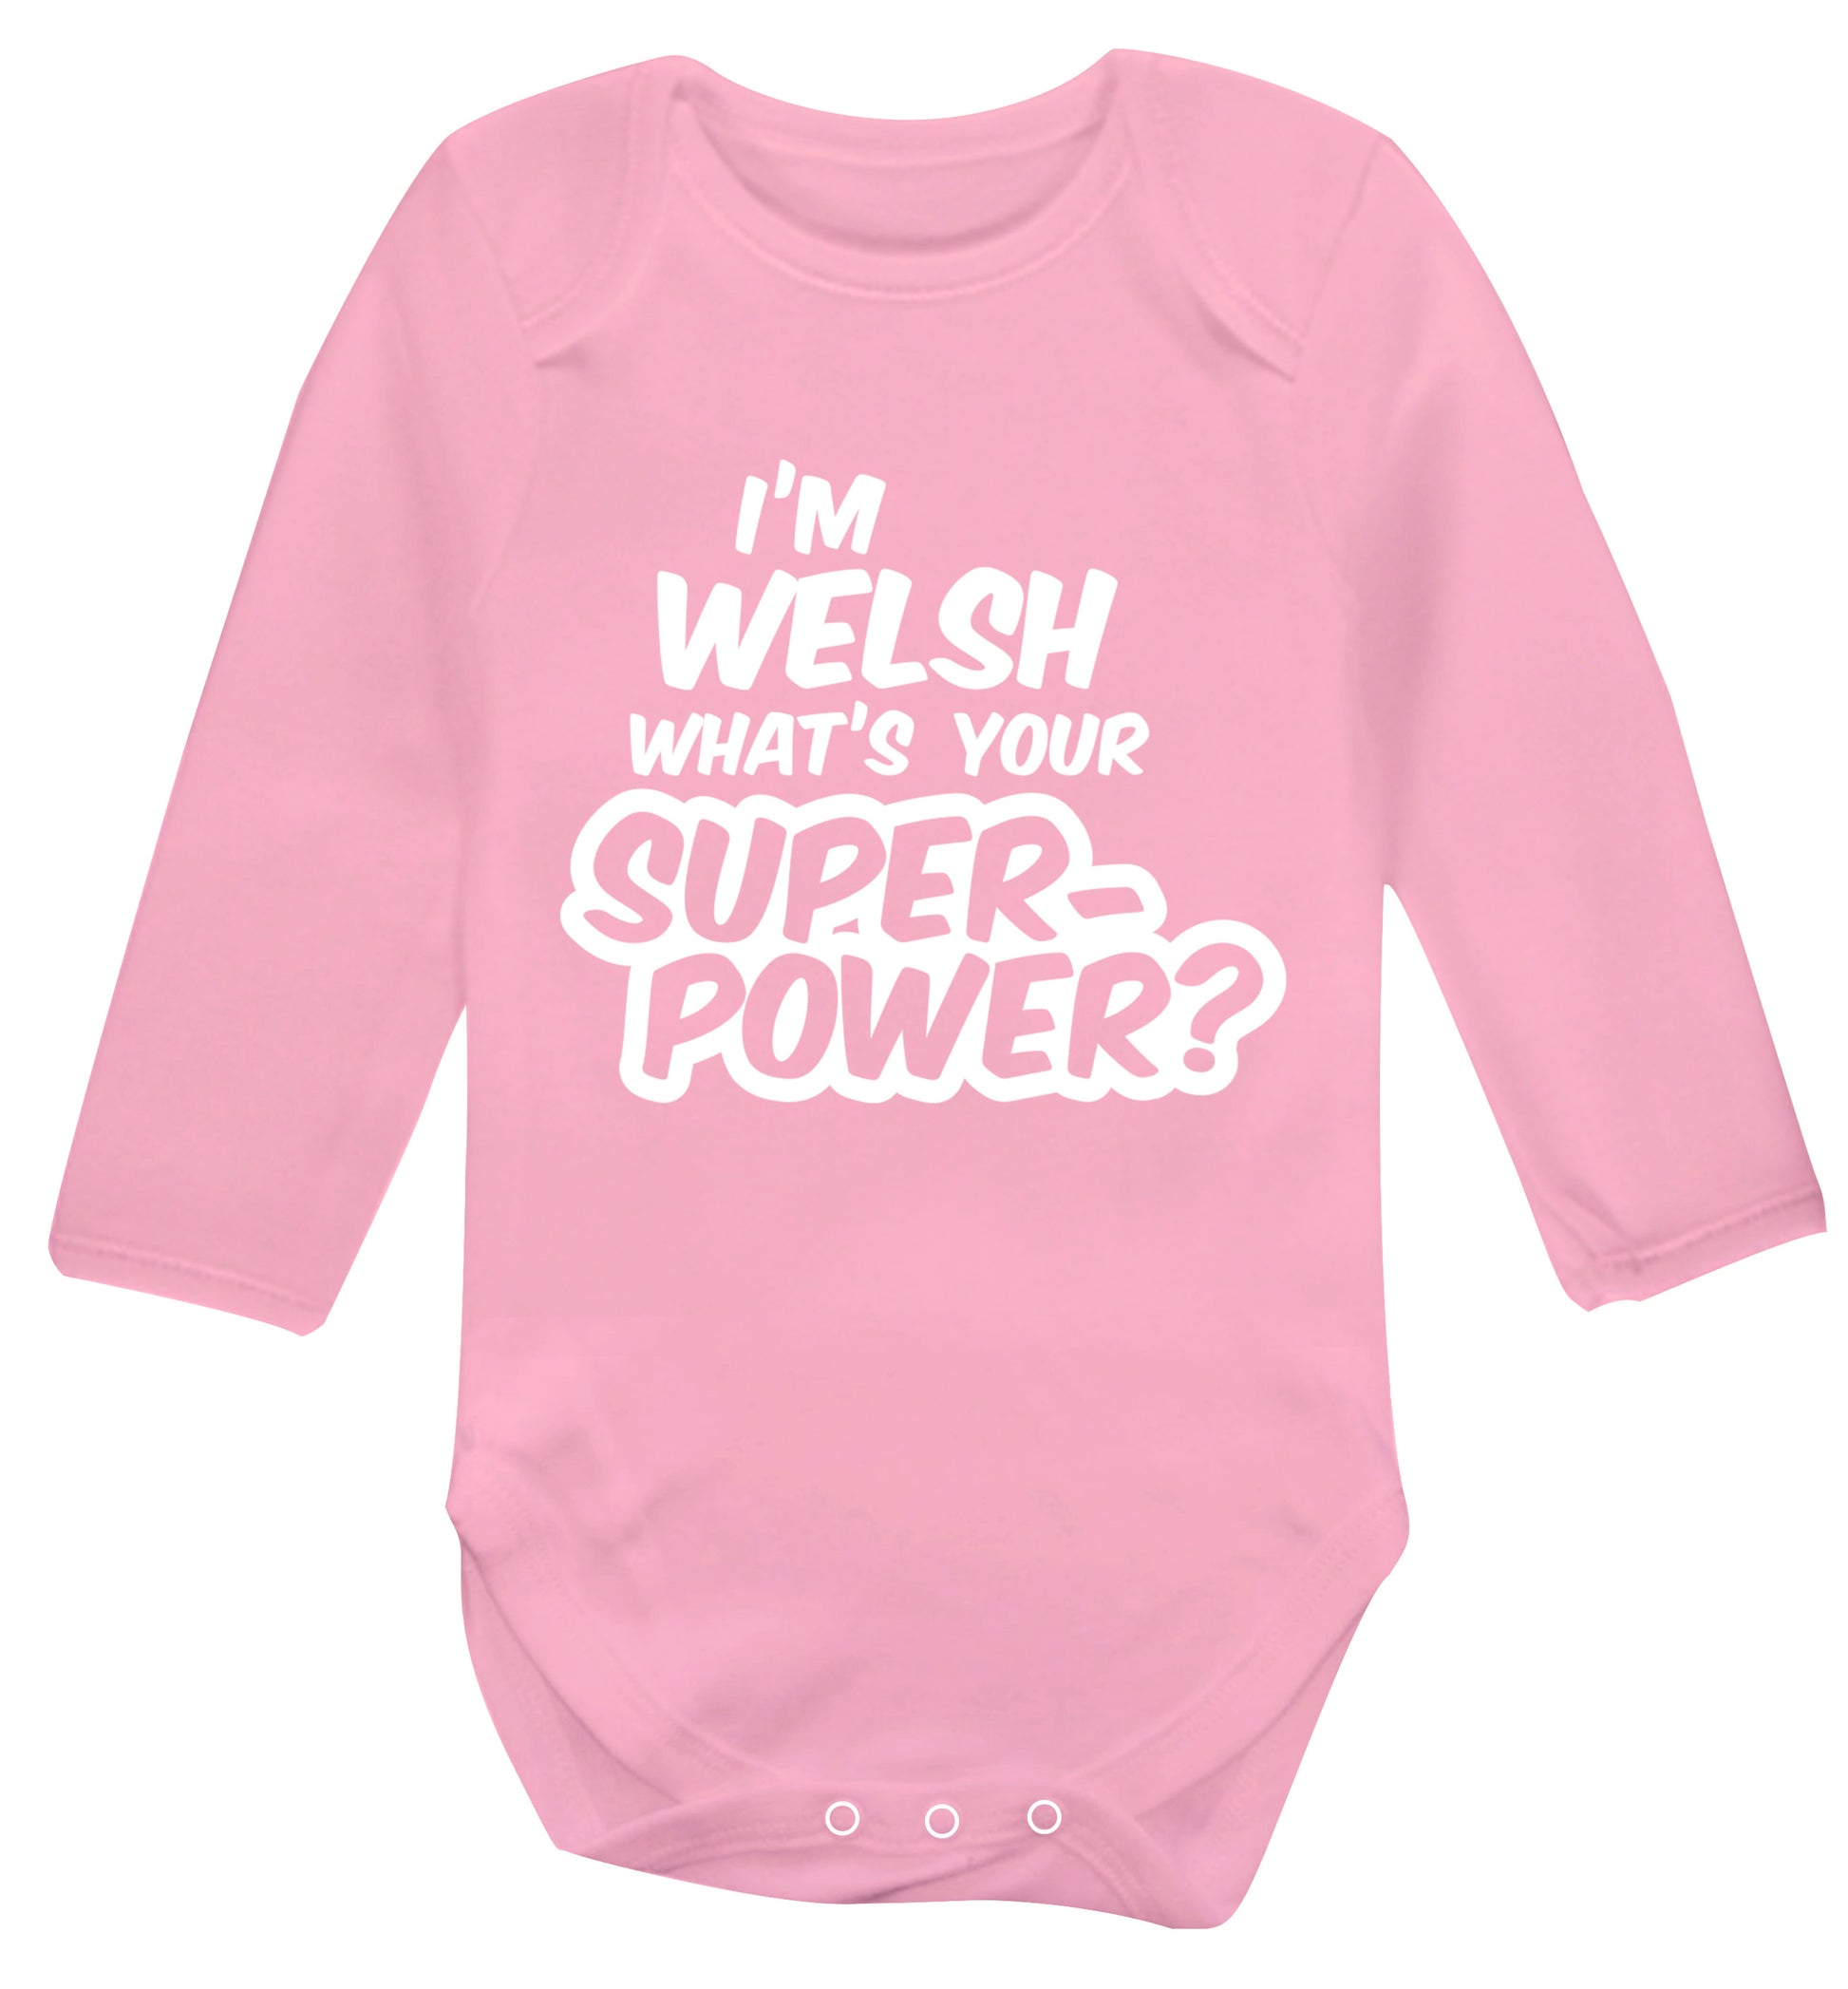 I'm Welsh what's your superpower? Baby Vest long sleeved pale pink 6-12 months